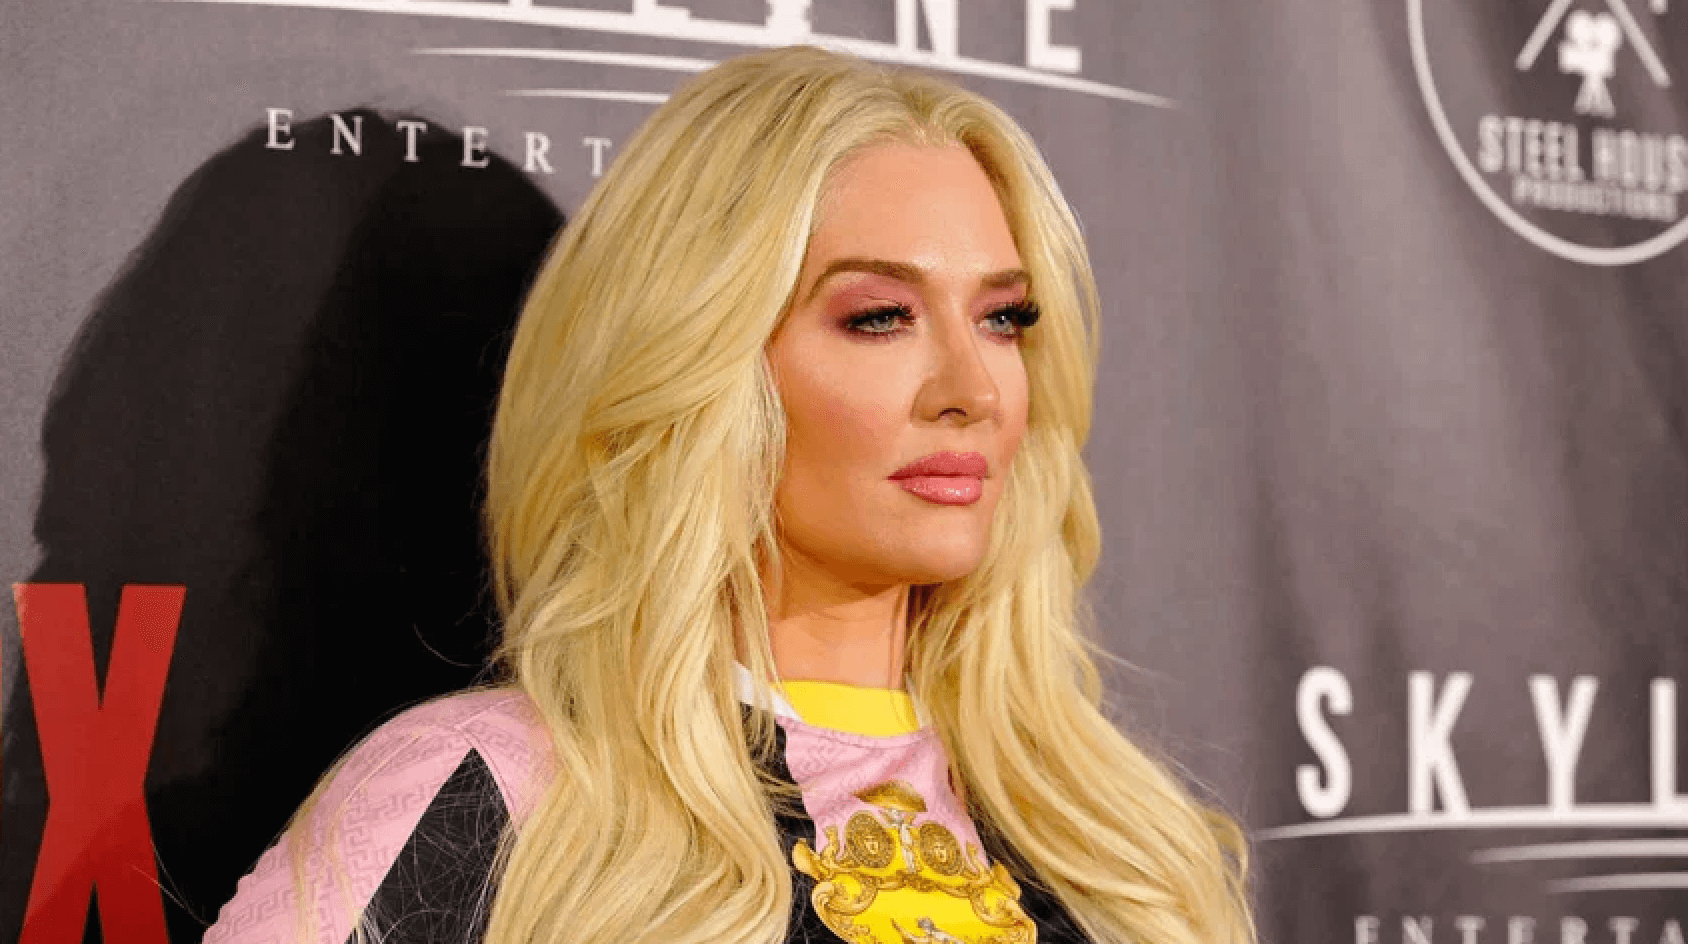 Lawyer Investigating Erika Jayne’s Assets Claims That She Received Stolen Millions From Tom… Erika’s Lawyers Jump Back On The Case!